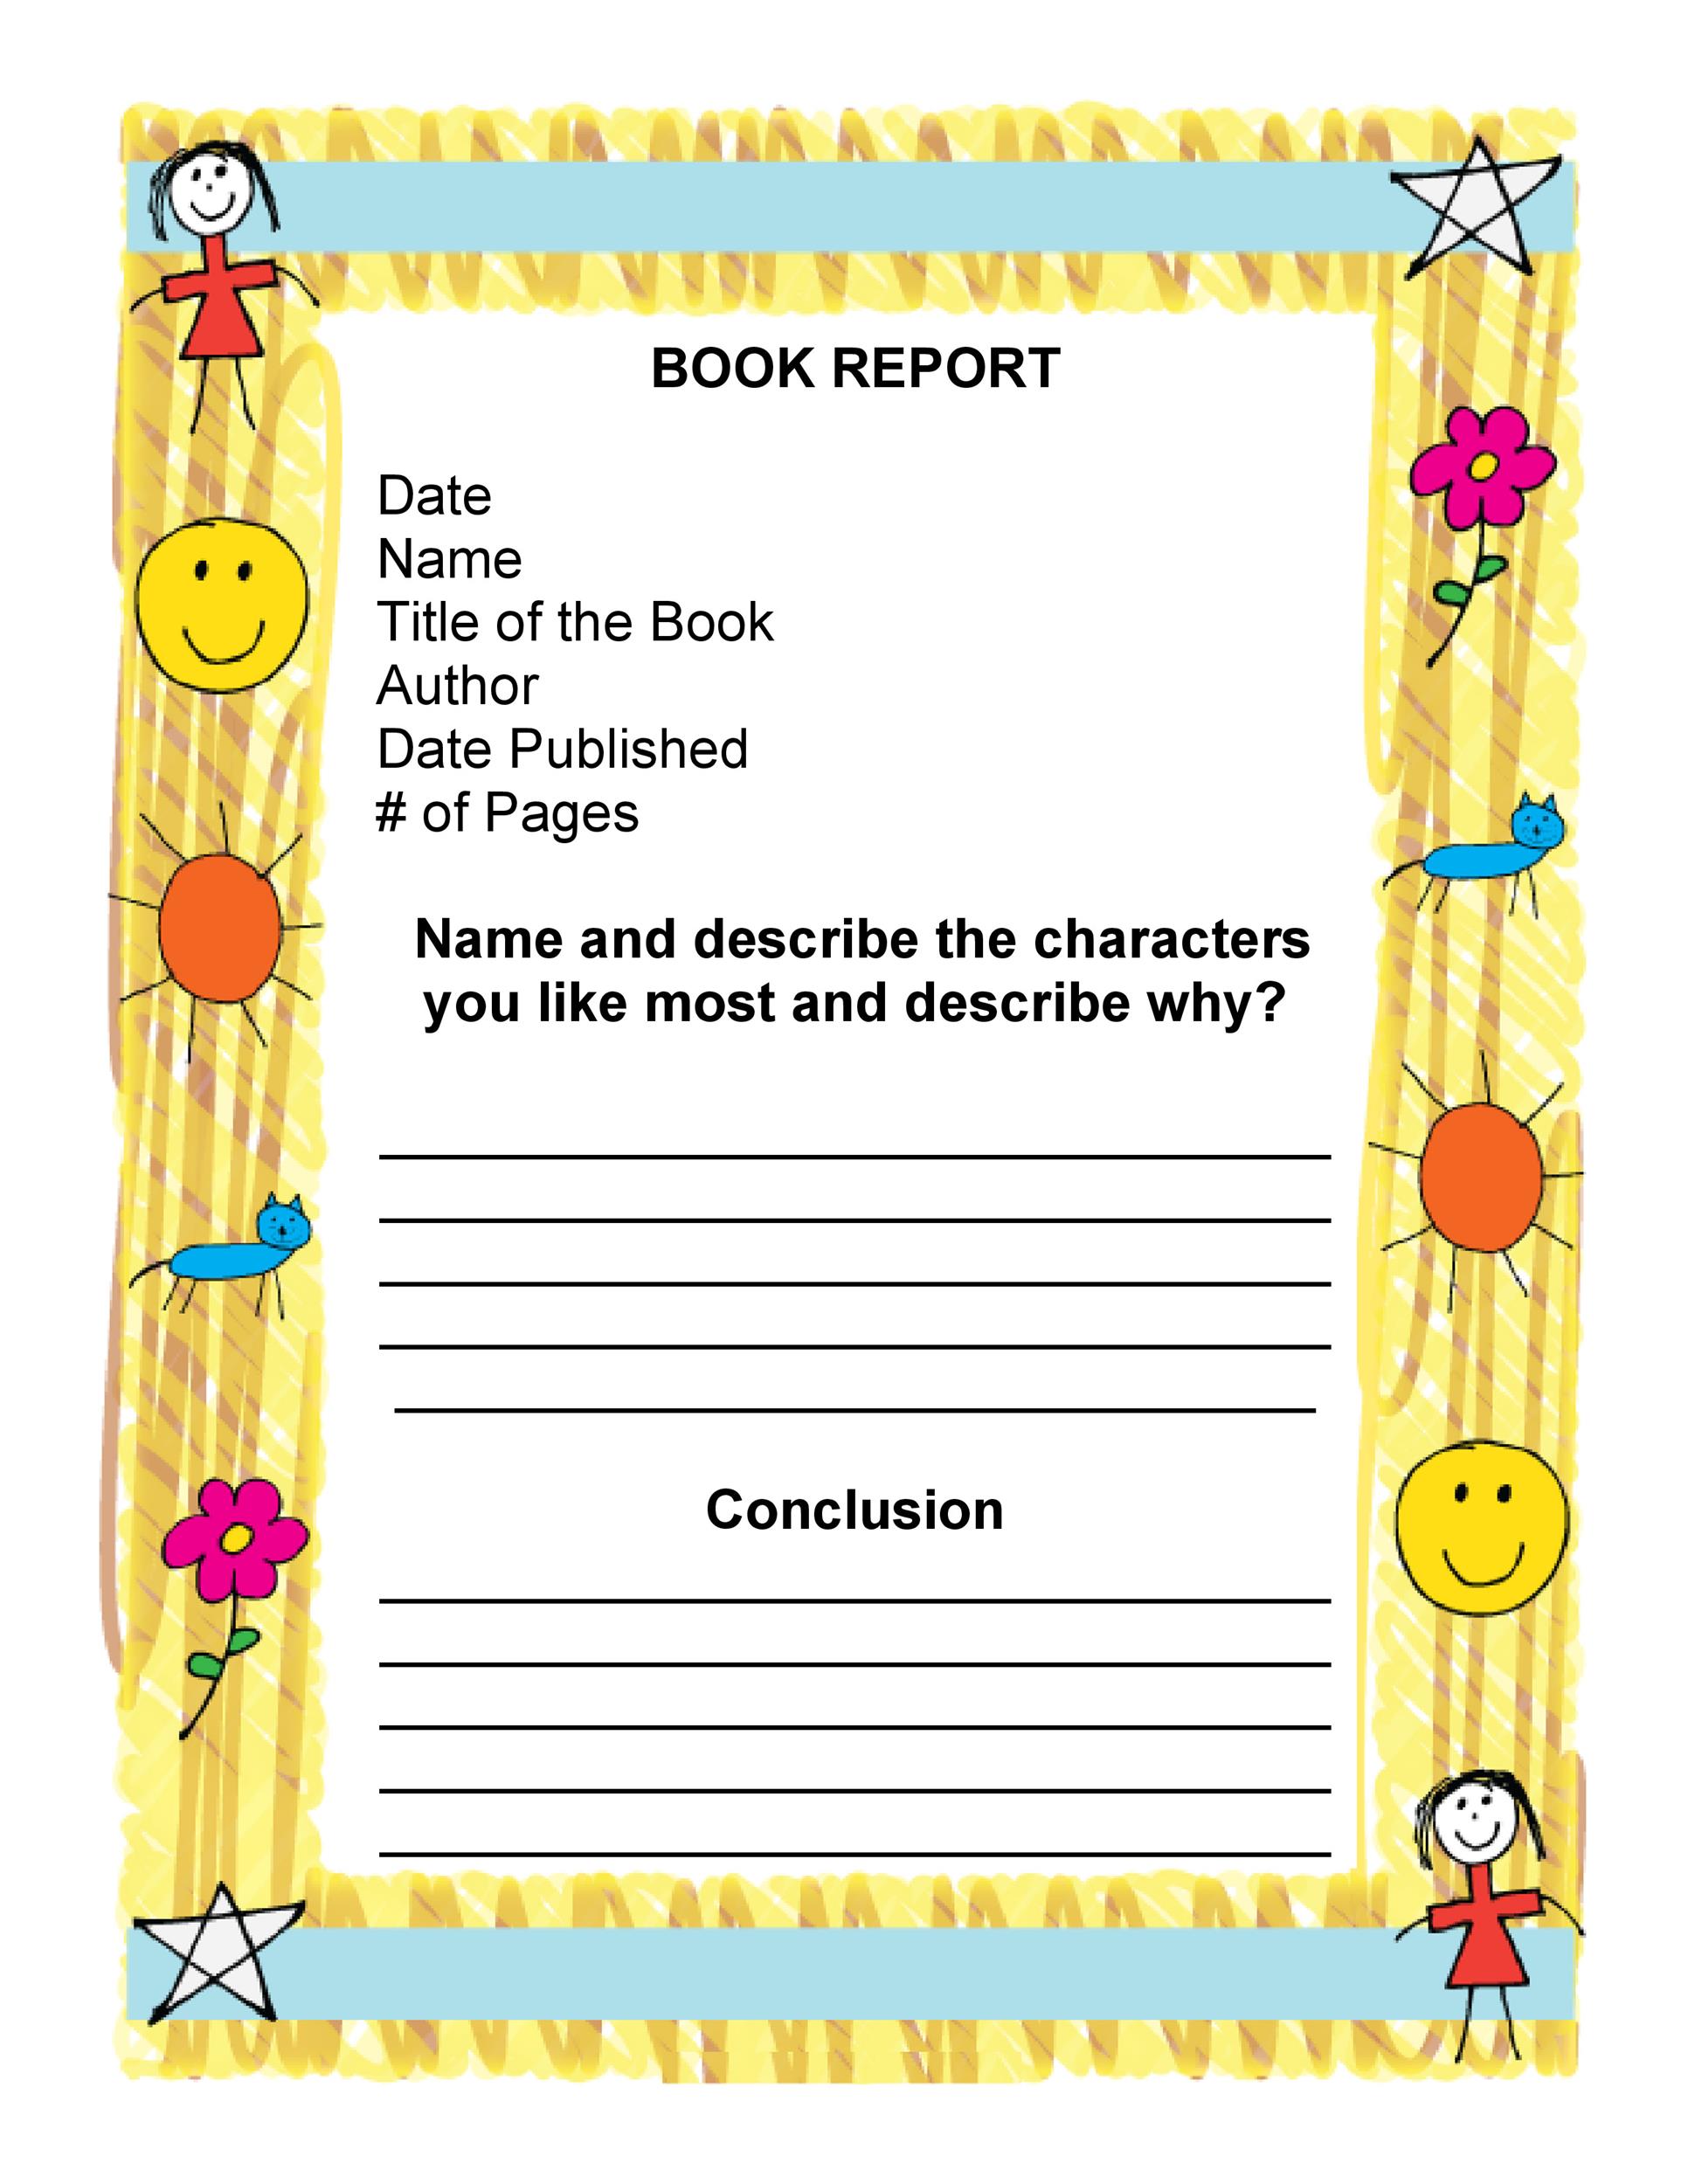 How to write a book report upper elementary school level